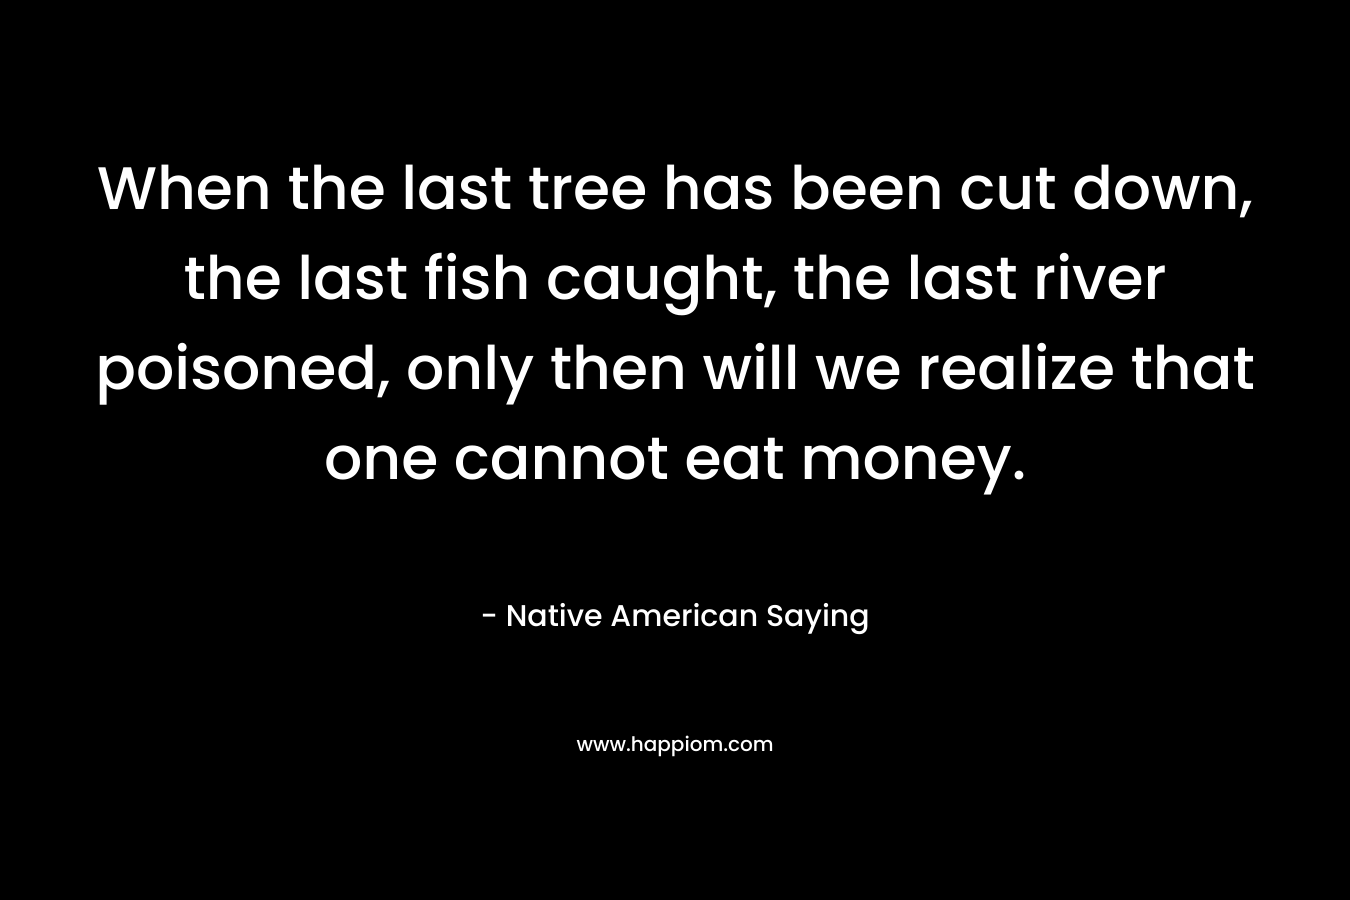 When the last tree has been cut down, the last fish caught, the last river poisoned, only then will we realize that one cannot eat money.